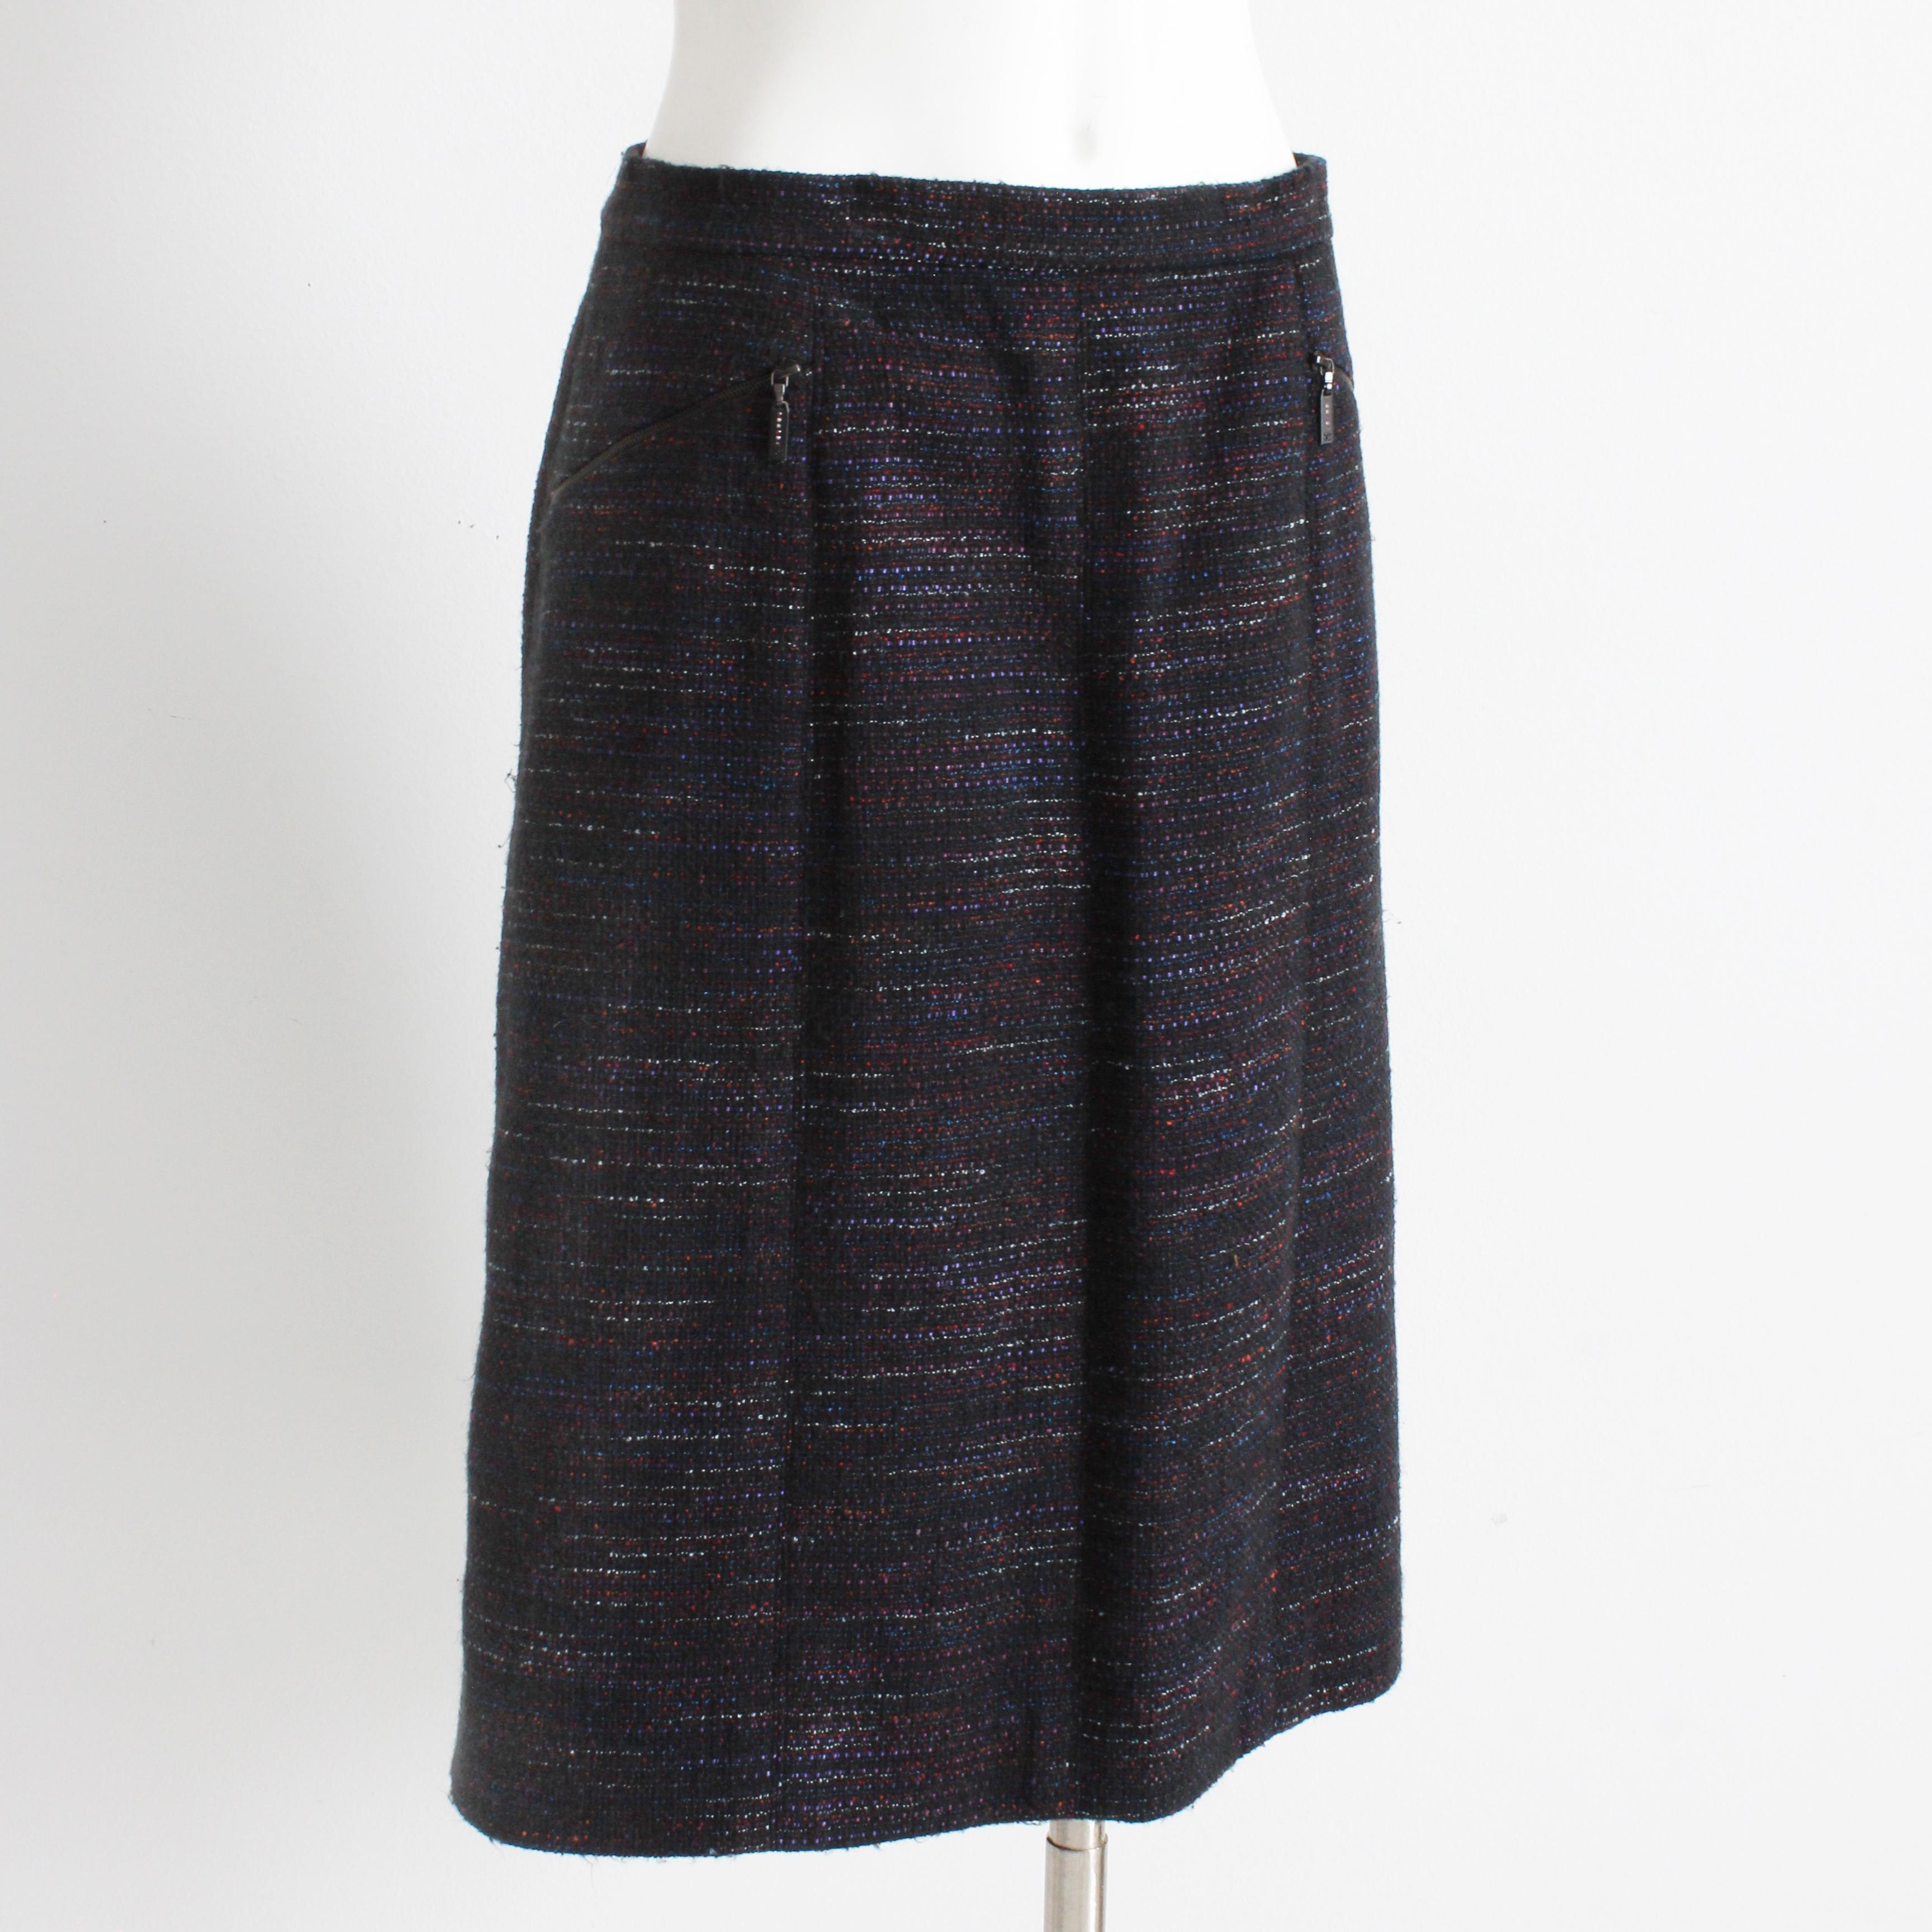 Chanel Skirt Multicolor Cotton Blend Tweed Pencil Style 02A Collection Size 40 For Sale 1